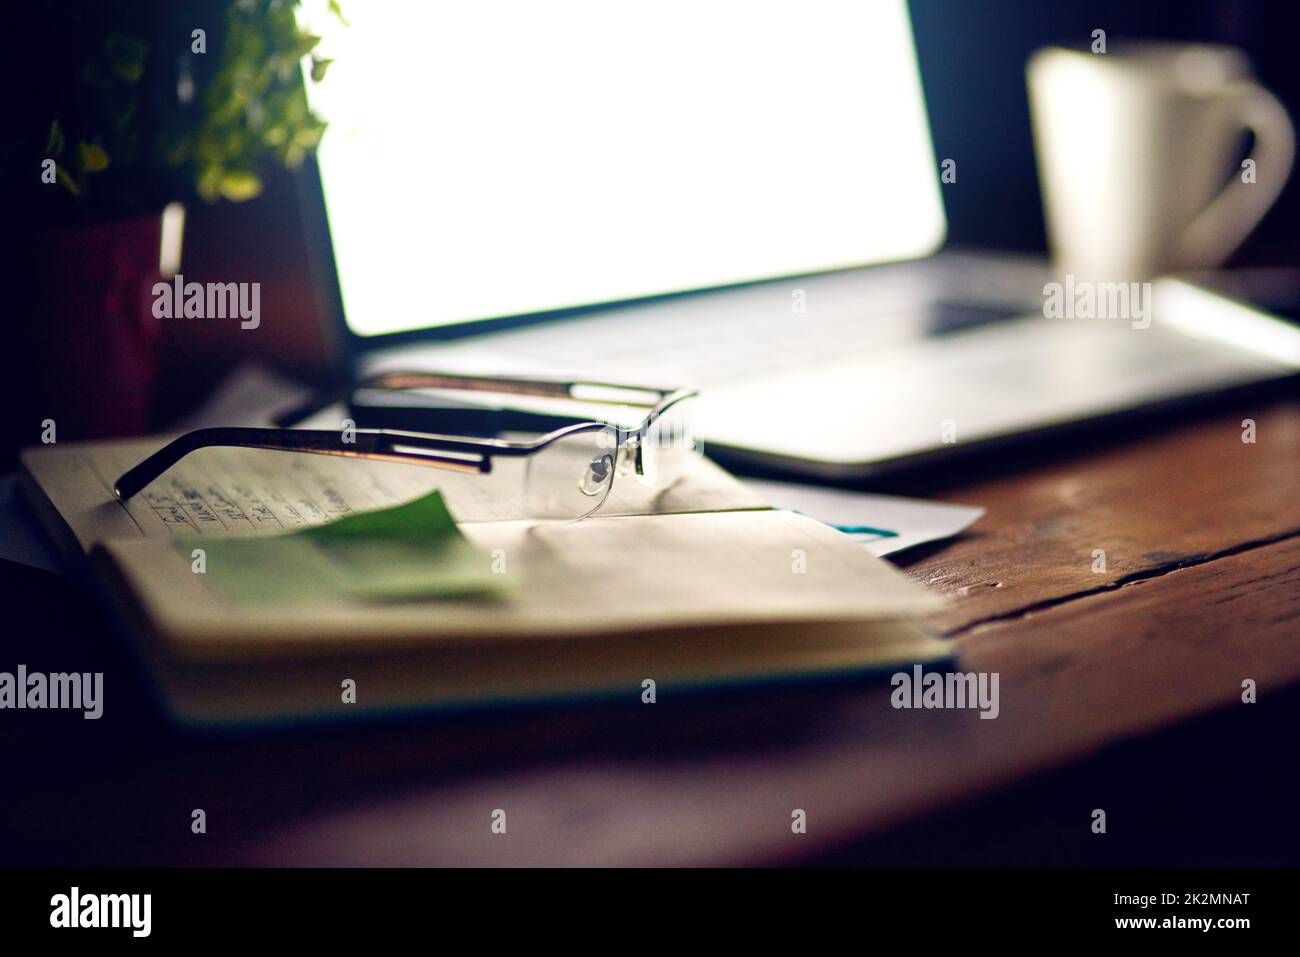 Coming back to it in the morning. Shot of reading glasses on top of a notepad and a laptop on a desk. Stock Photo